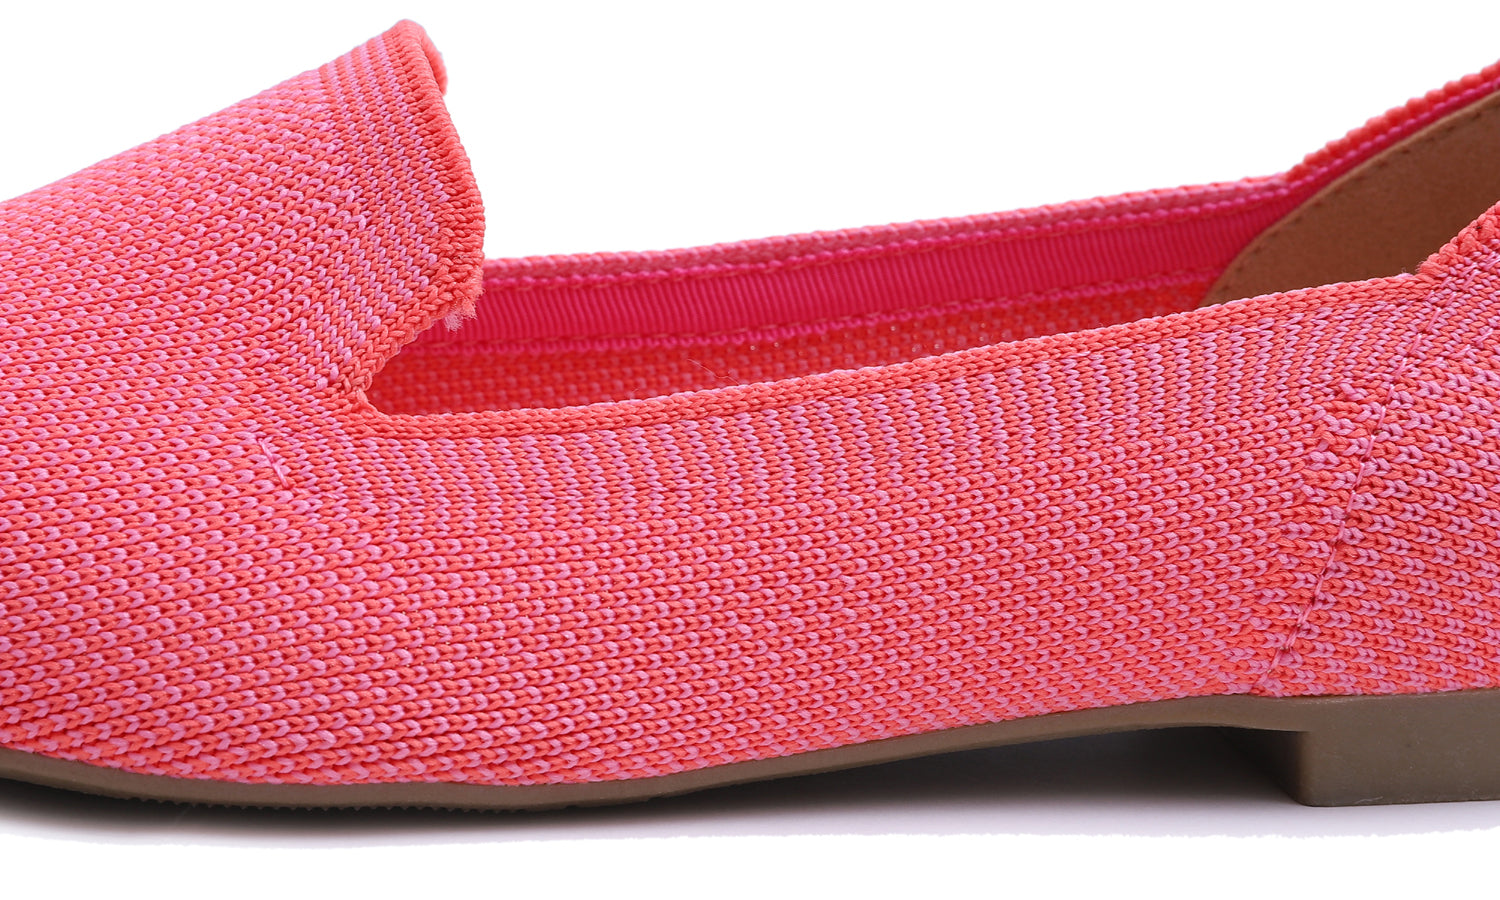 Feversole Women's Woven Fashion Breathable Knit Flat Shoes Coral Mixed Loafer